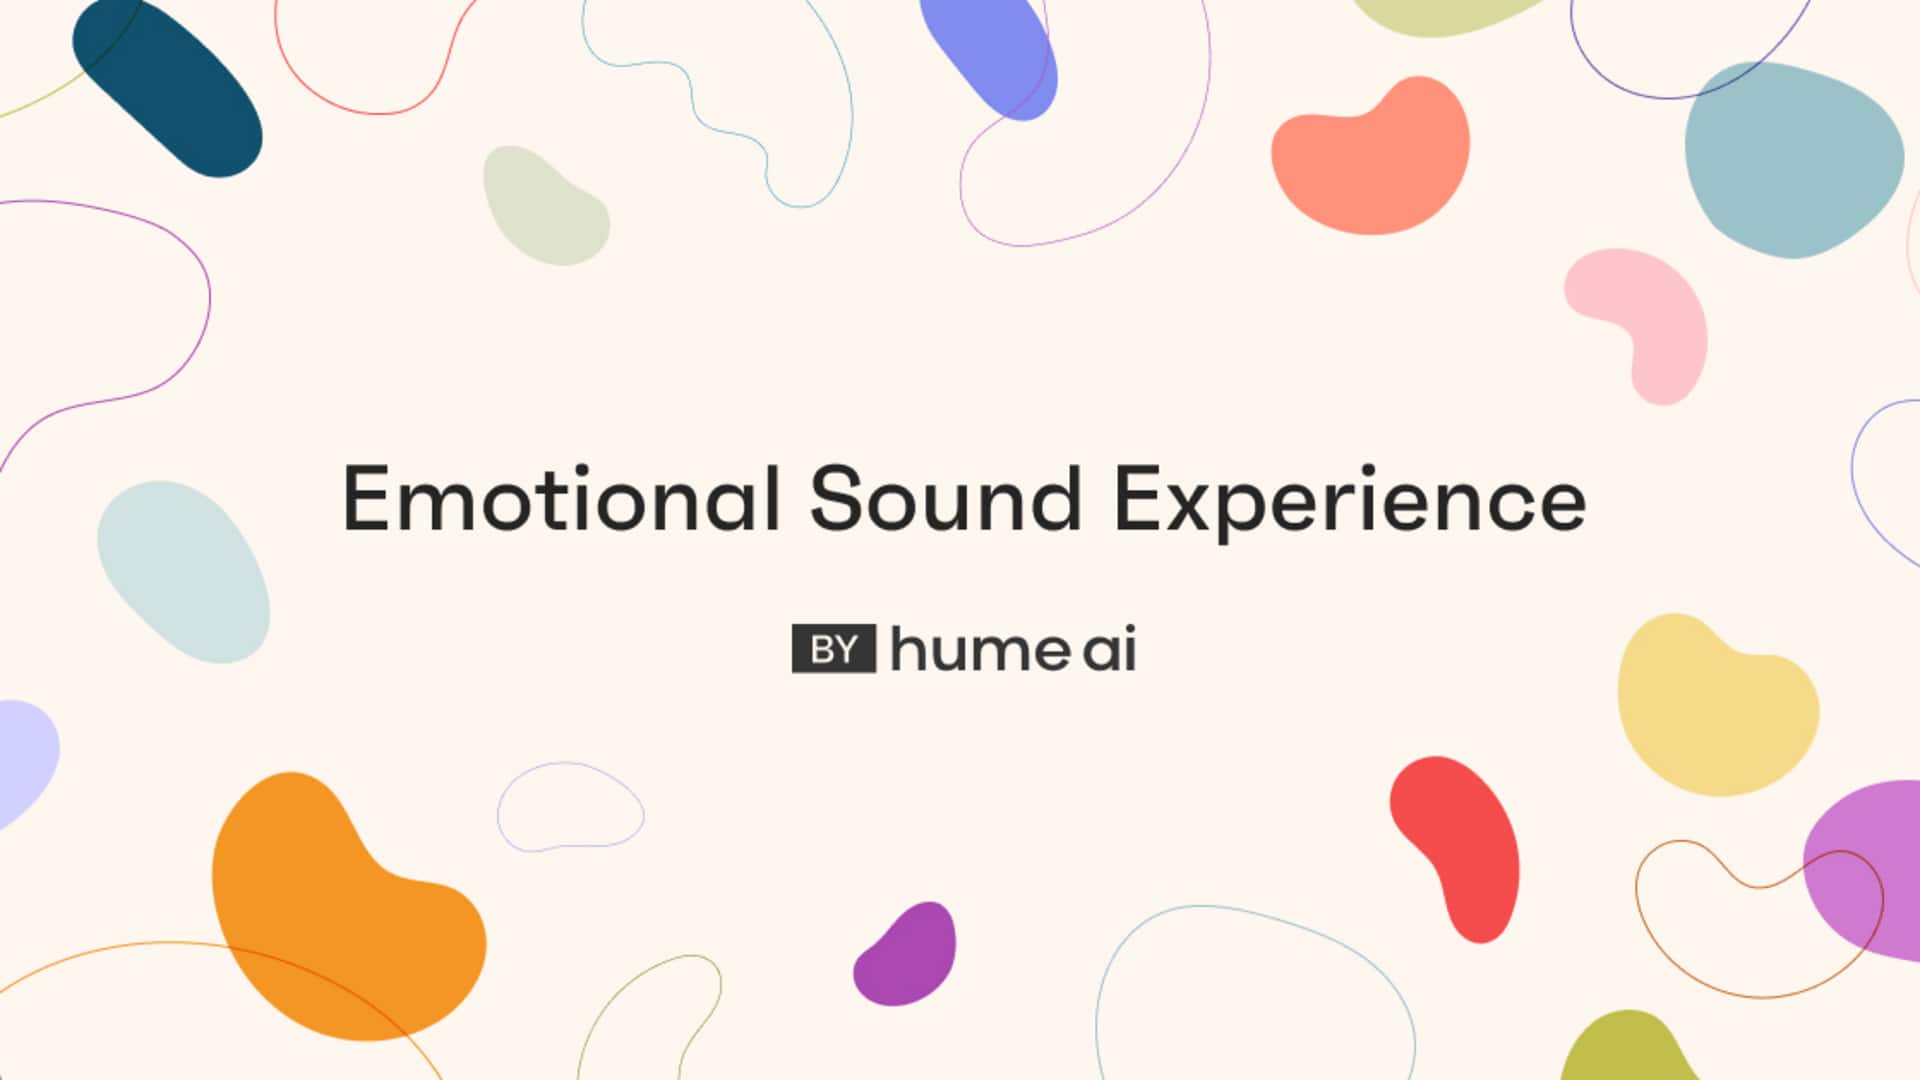 Hume AI secures $50 million funding for 'emotional' AI chatbot